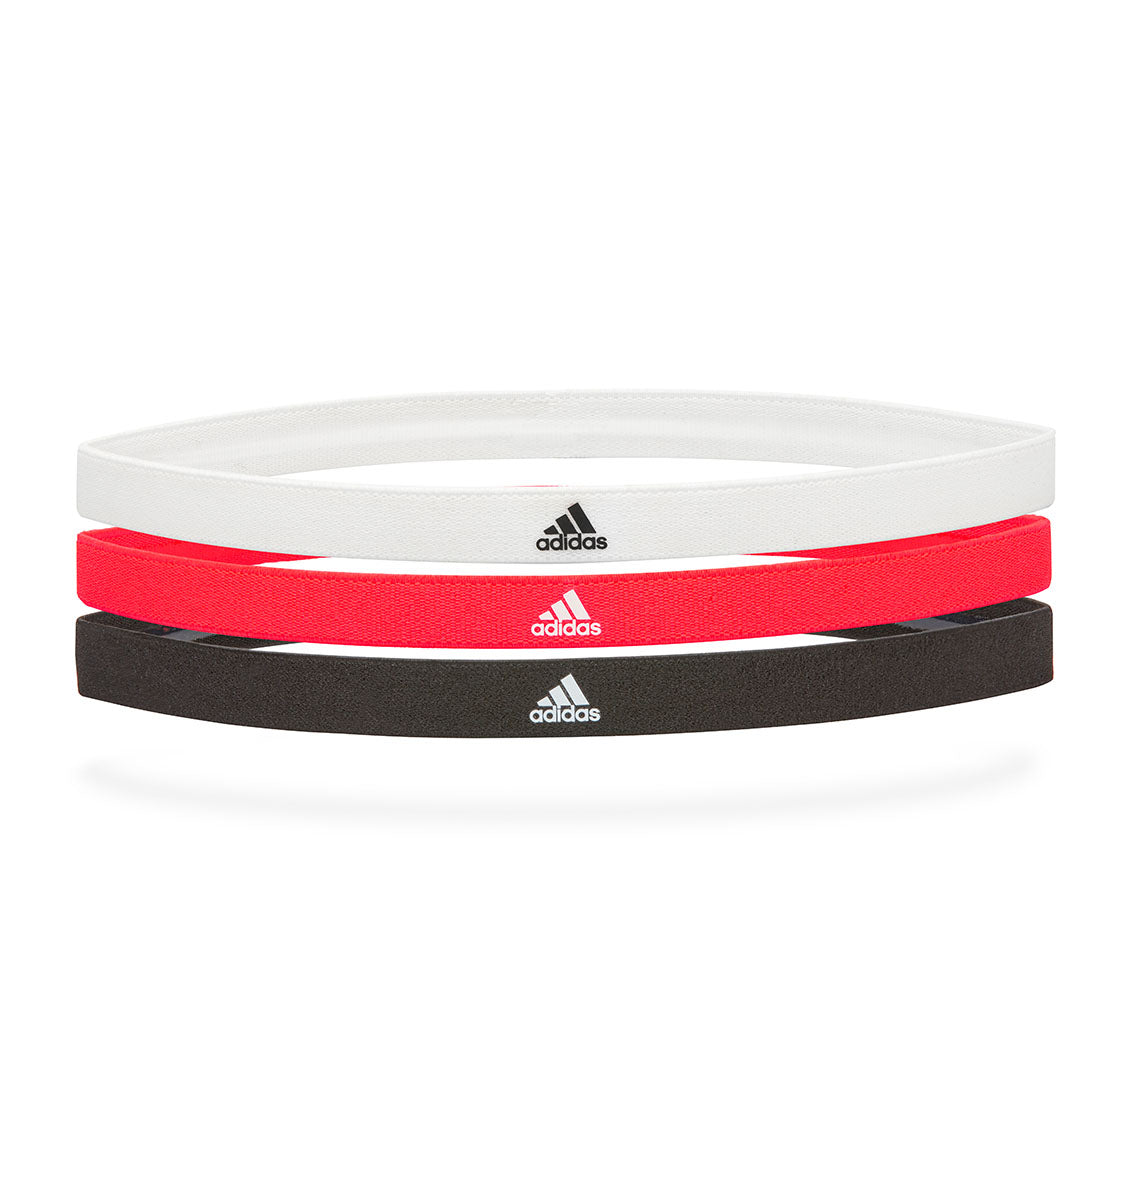 adidas Sports Hair Bands - Black/White/Solar Red (3 Pack) - 1